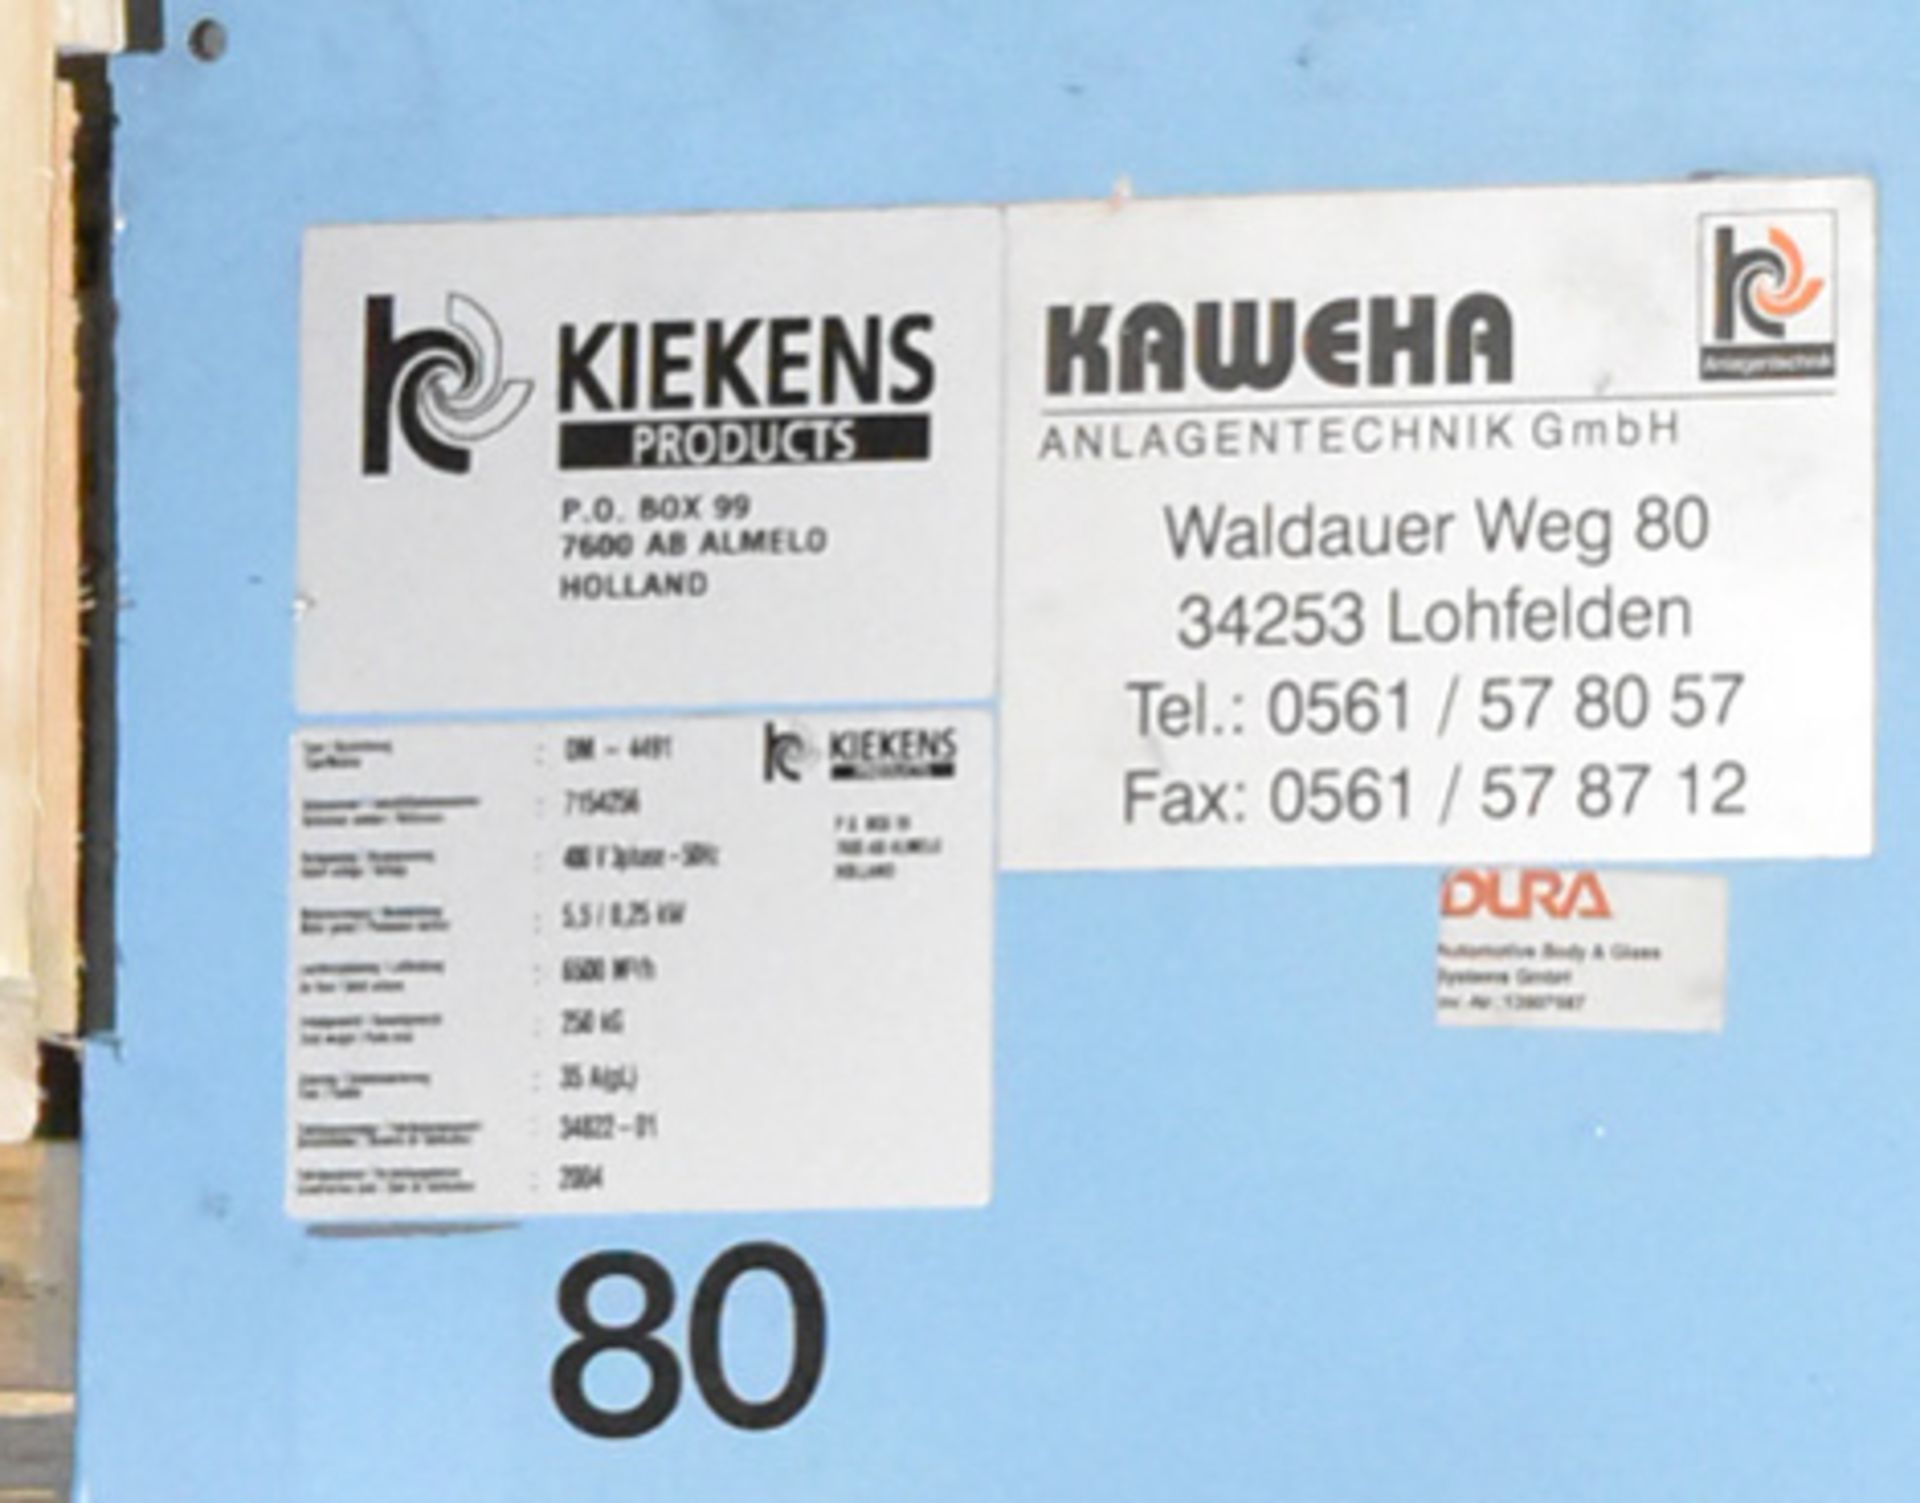 KIEKENS DM-4491 5.5 KW DUST COLLECTOR WITH 6500 M3/HR CAP, S/N 7154756 (SEL) [Removal Fee = € 82. - Image 2 of 2